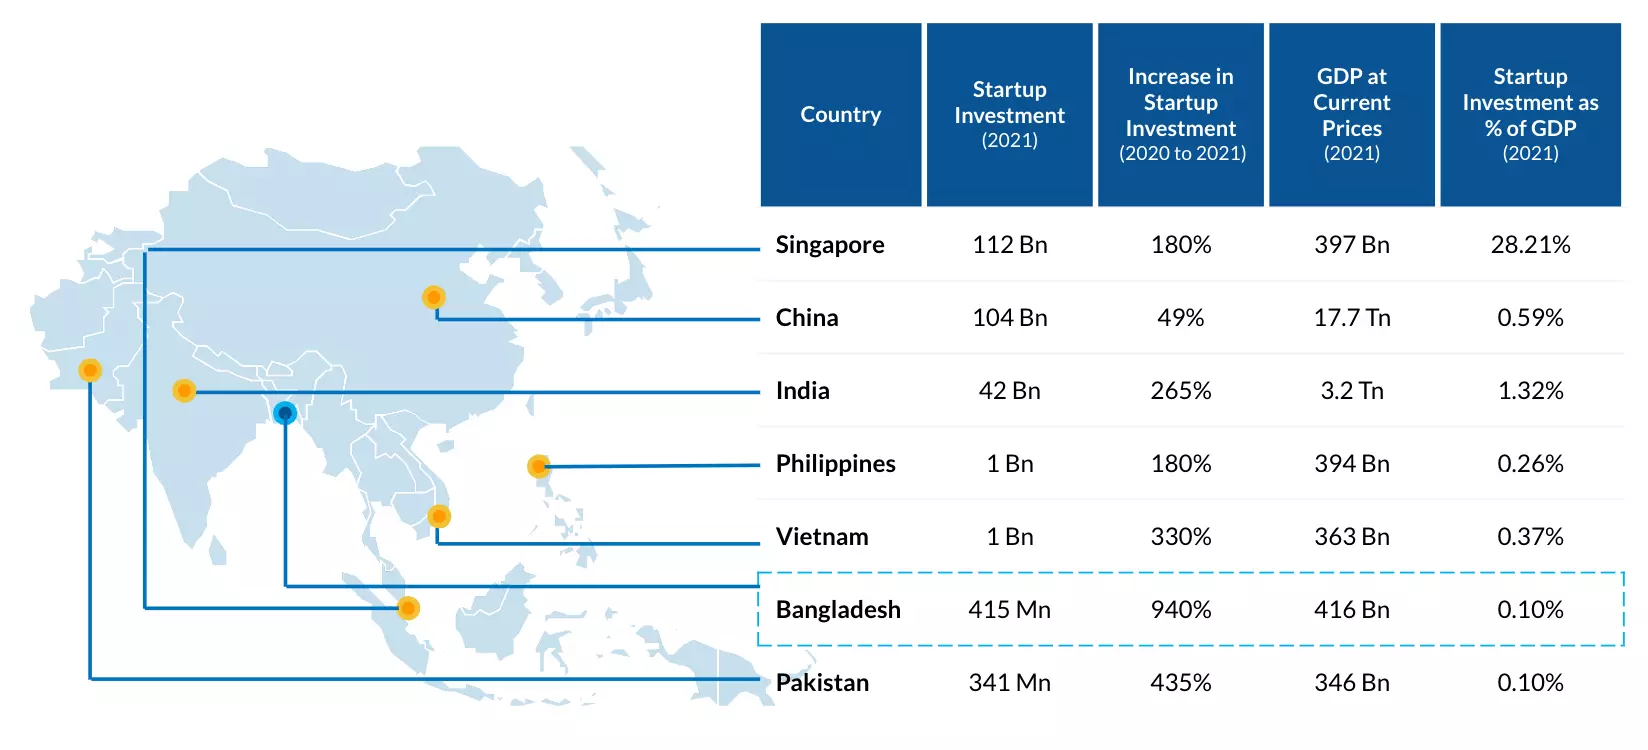 Startup Investment Trends in Asia